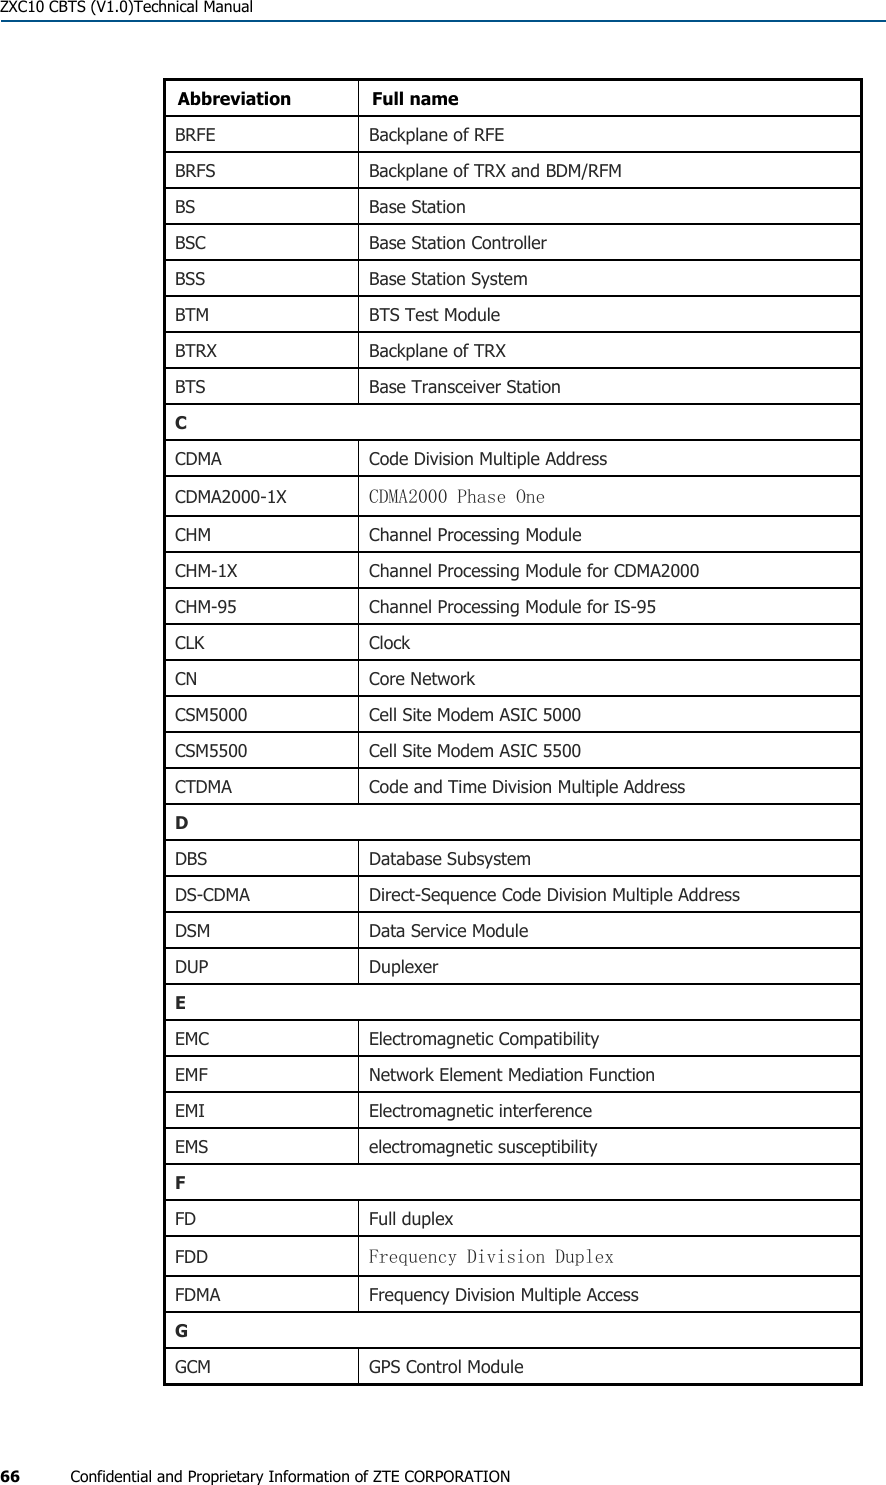  ZXC10 CBTS (V1.0)Technical Manual 66  Confidential and Proprietary Information of ZTE CORPORATION Abbreviation Full name BRFE  Backplane of RFE BRFS  Backplane of TRX and BDM/RFM BS Base Station BSC  Base Station Controller BSS Base Station System BTM BTS Test Module BTRX  Backplane of TRX BTS  Base Transceiver Station C CDMA Code Division Multiple Address CDMA2000-1X  CDMA2000 Phase One CHM Channel Processing Module CHM-1X  Channel Processing Module for CDMA2000 CHM-95  Channel Processing Module for IS-95 CLK Clock CN Core Network CSM5000  Cell Site Modem ASIC 5000 CSM5500  Cell Site Modem ASIC 5500 CTDMA  Code and Time Division Multiple Address D DBS Database Subsystem DS-CDMA Direct-Sequence Code Division Multiple Address DSM  Data Service Module DUP Duplexer E EMC Electromagnetic Compatibility EMF  Network Element Mediation Function EMI Electromagnetic interference EMS electromagnetic susceptibility F FD Full duplex FDD  Frequency Division Duplex FDMA  Frequency Division Multiple Access G GCM GPS Control Module 